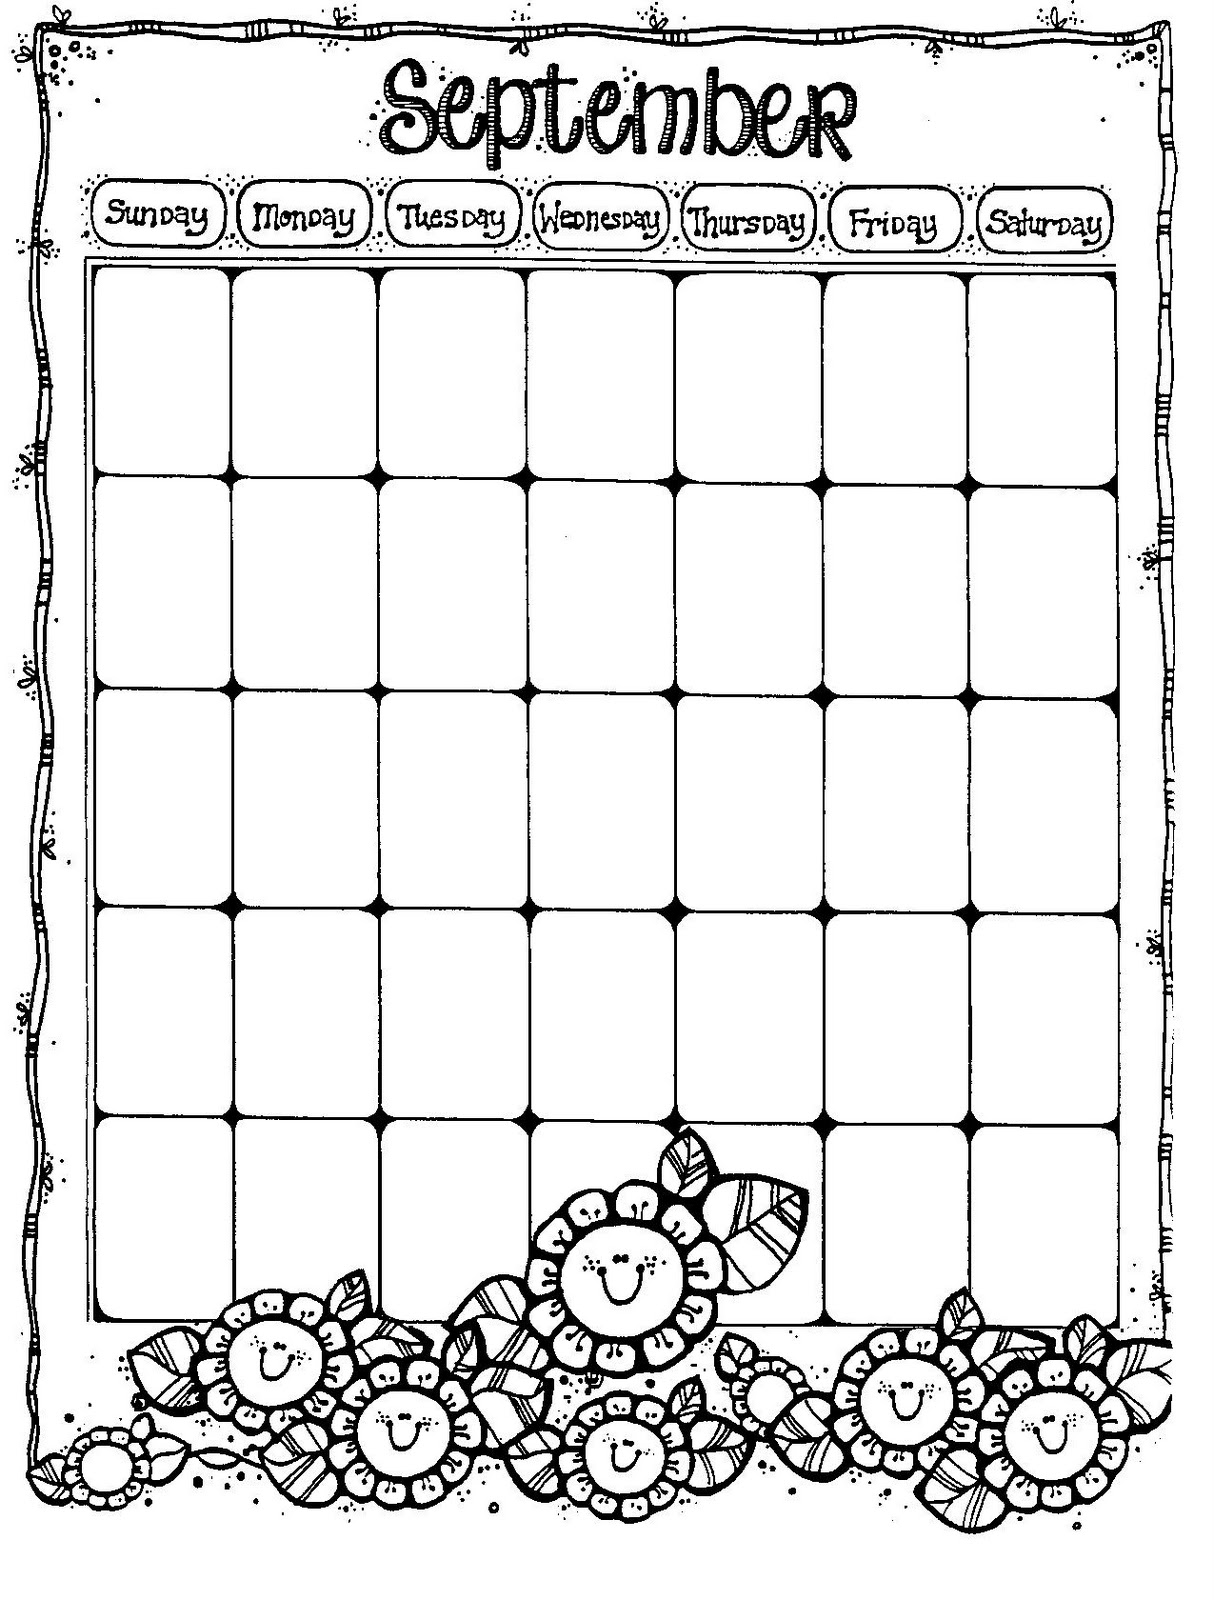 Connie S File Cabinet MONTHLY BLANK CALENDAR PAGES FOR A YEAR